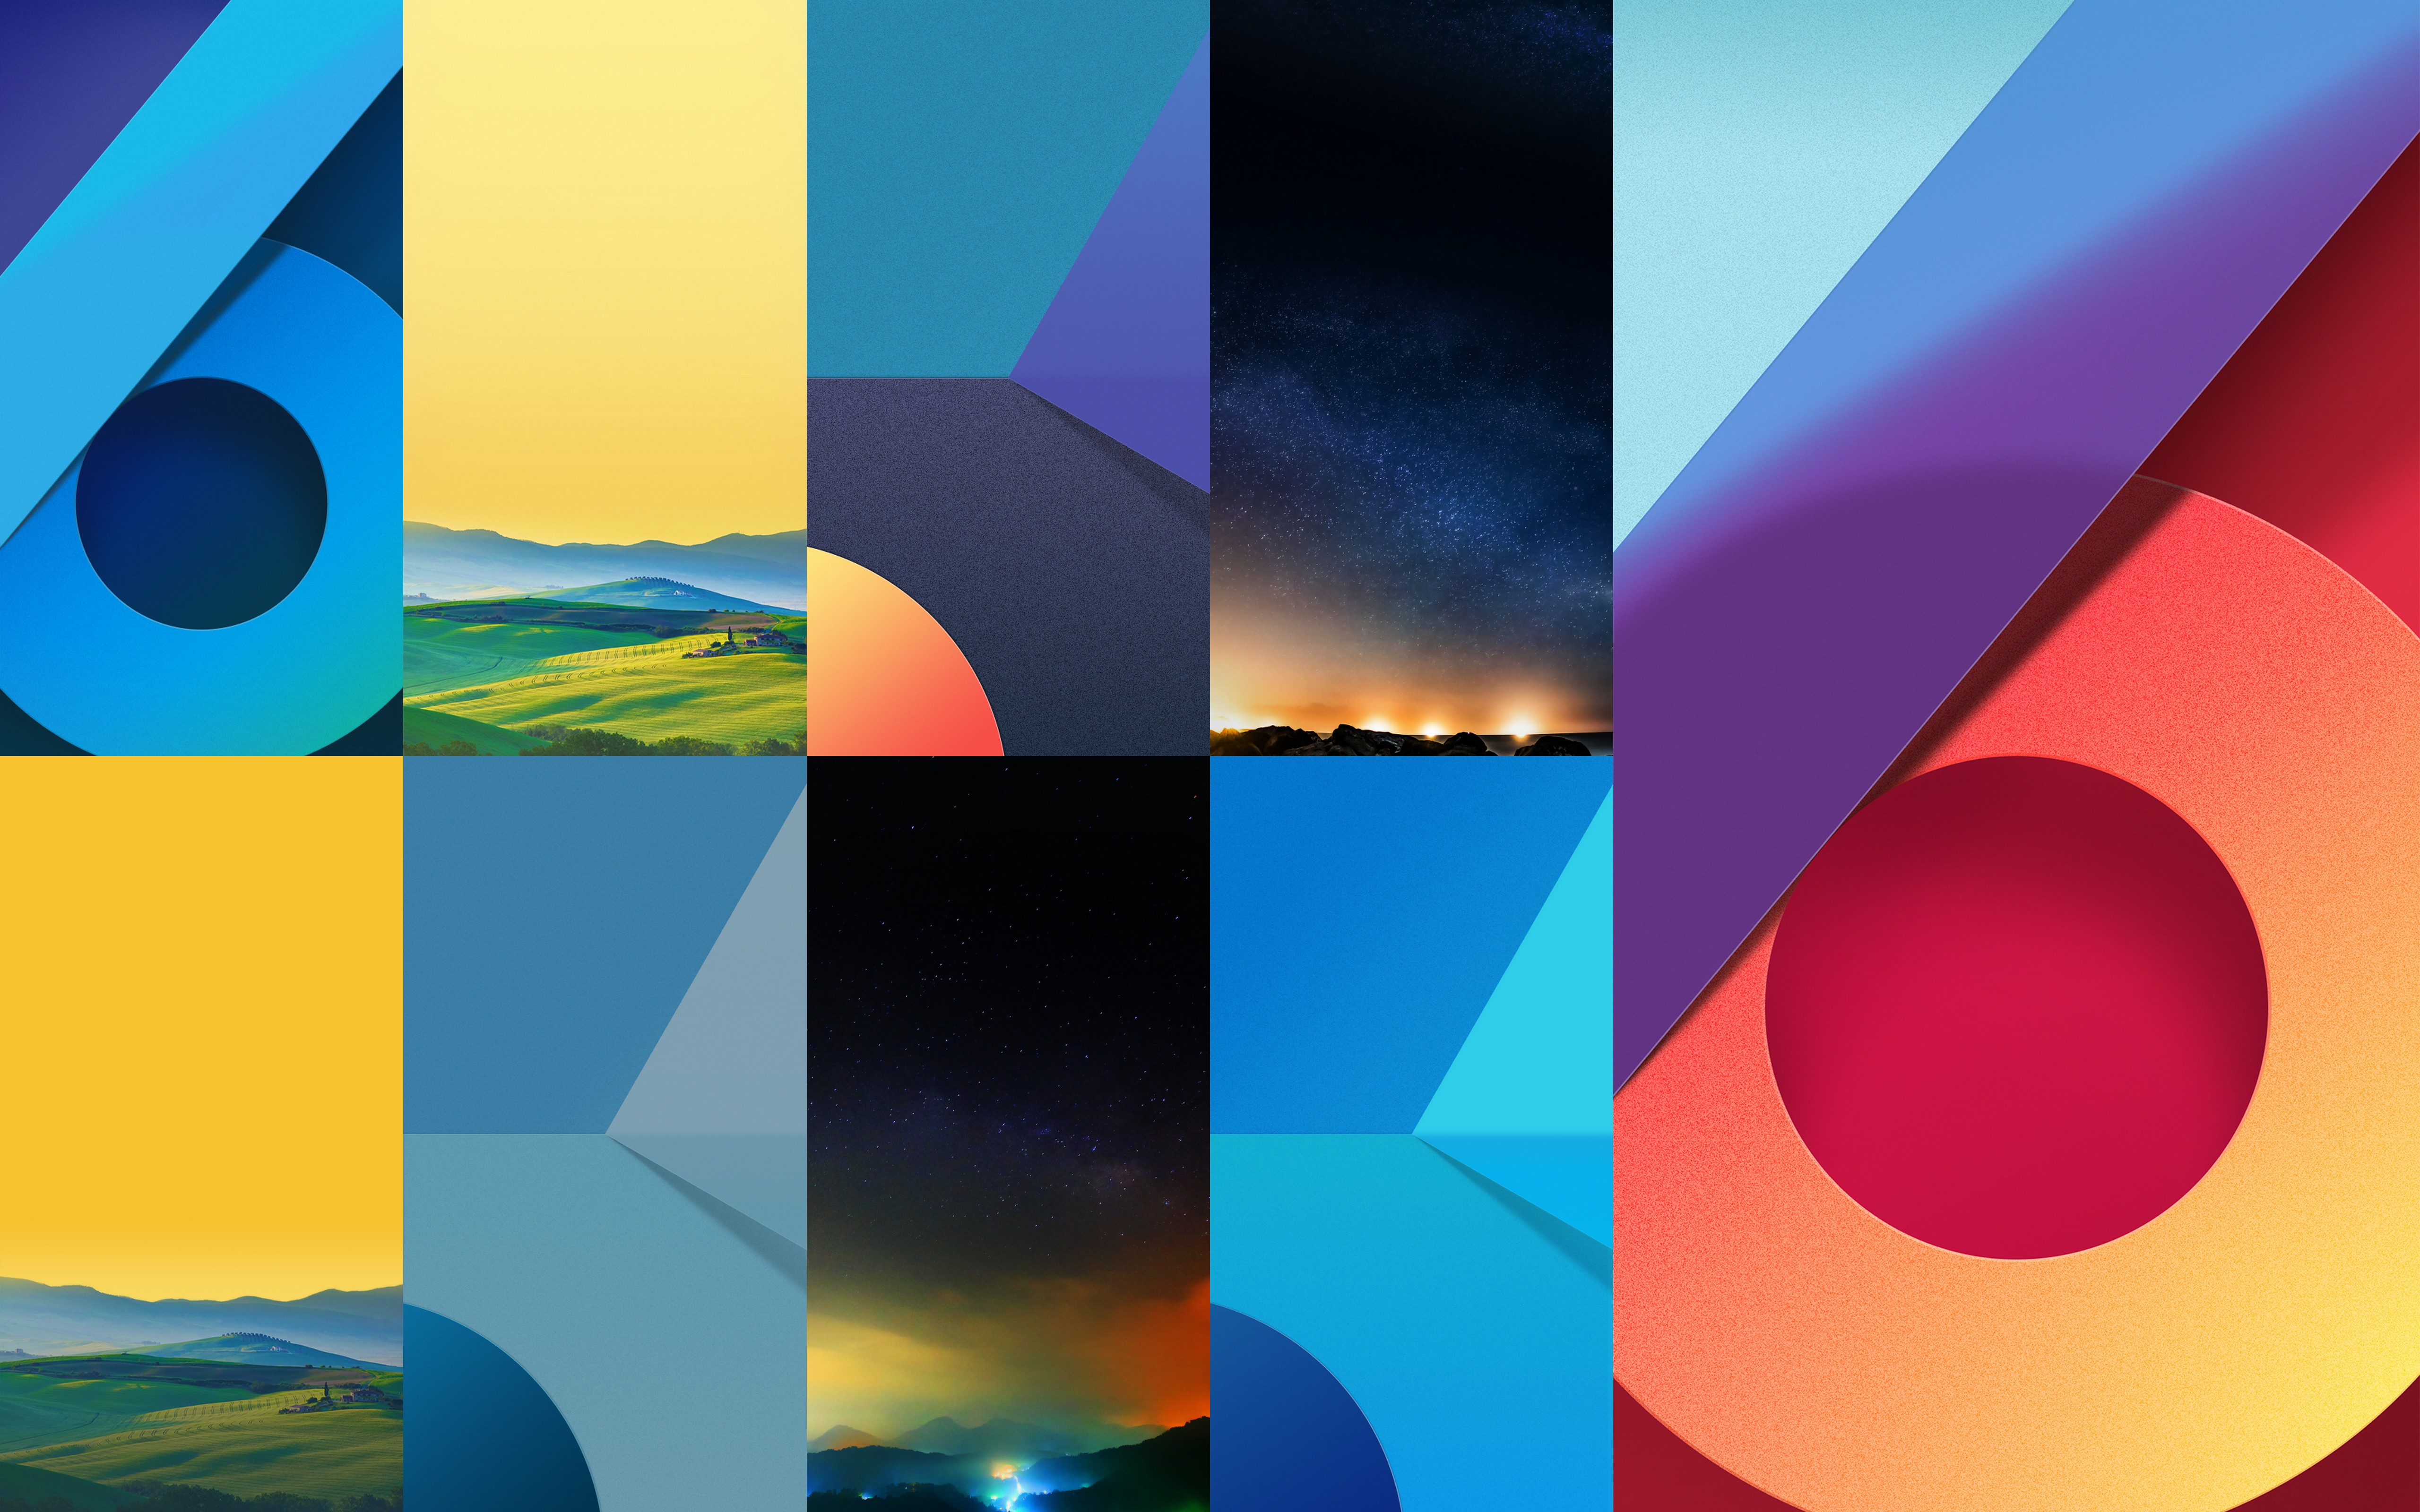 Download LG Q6 Stock Wallpapers in Full-HD